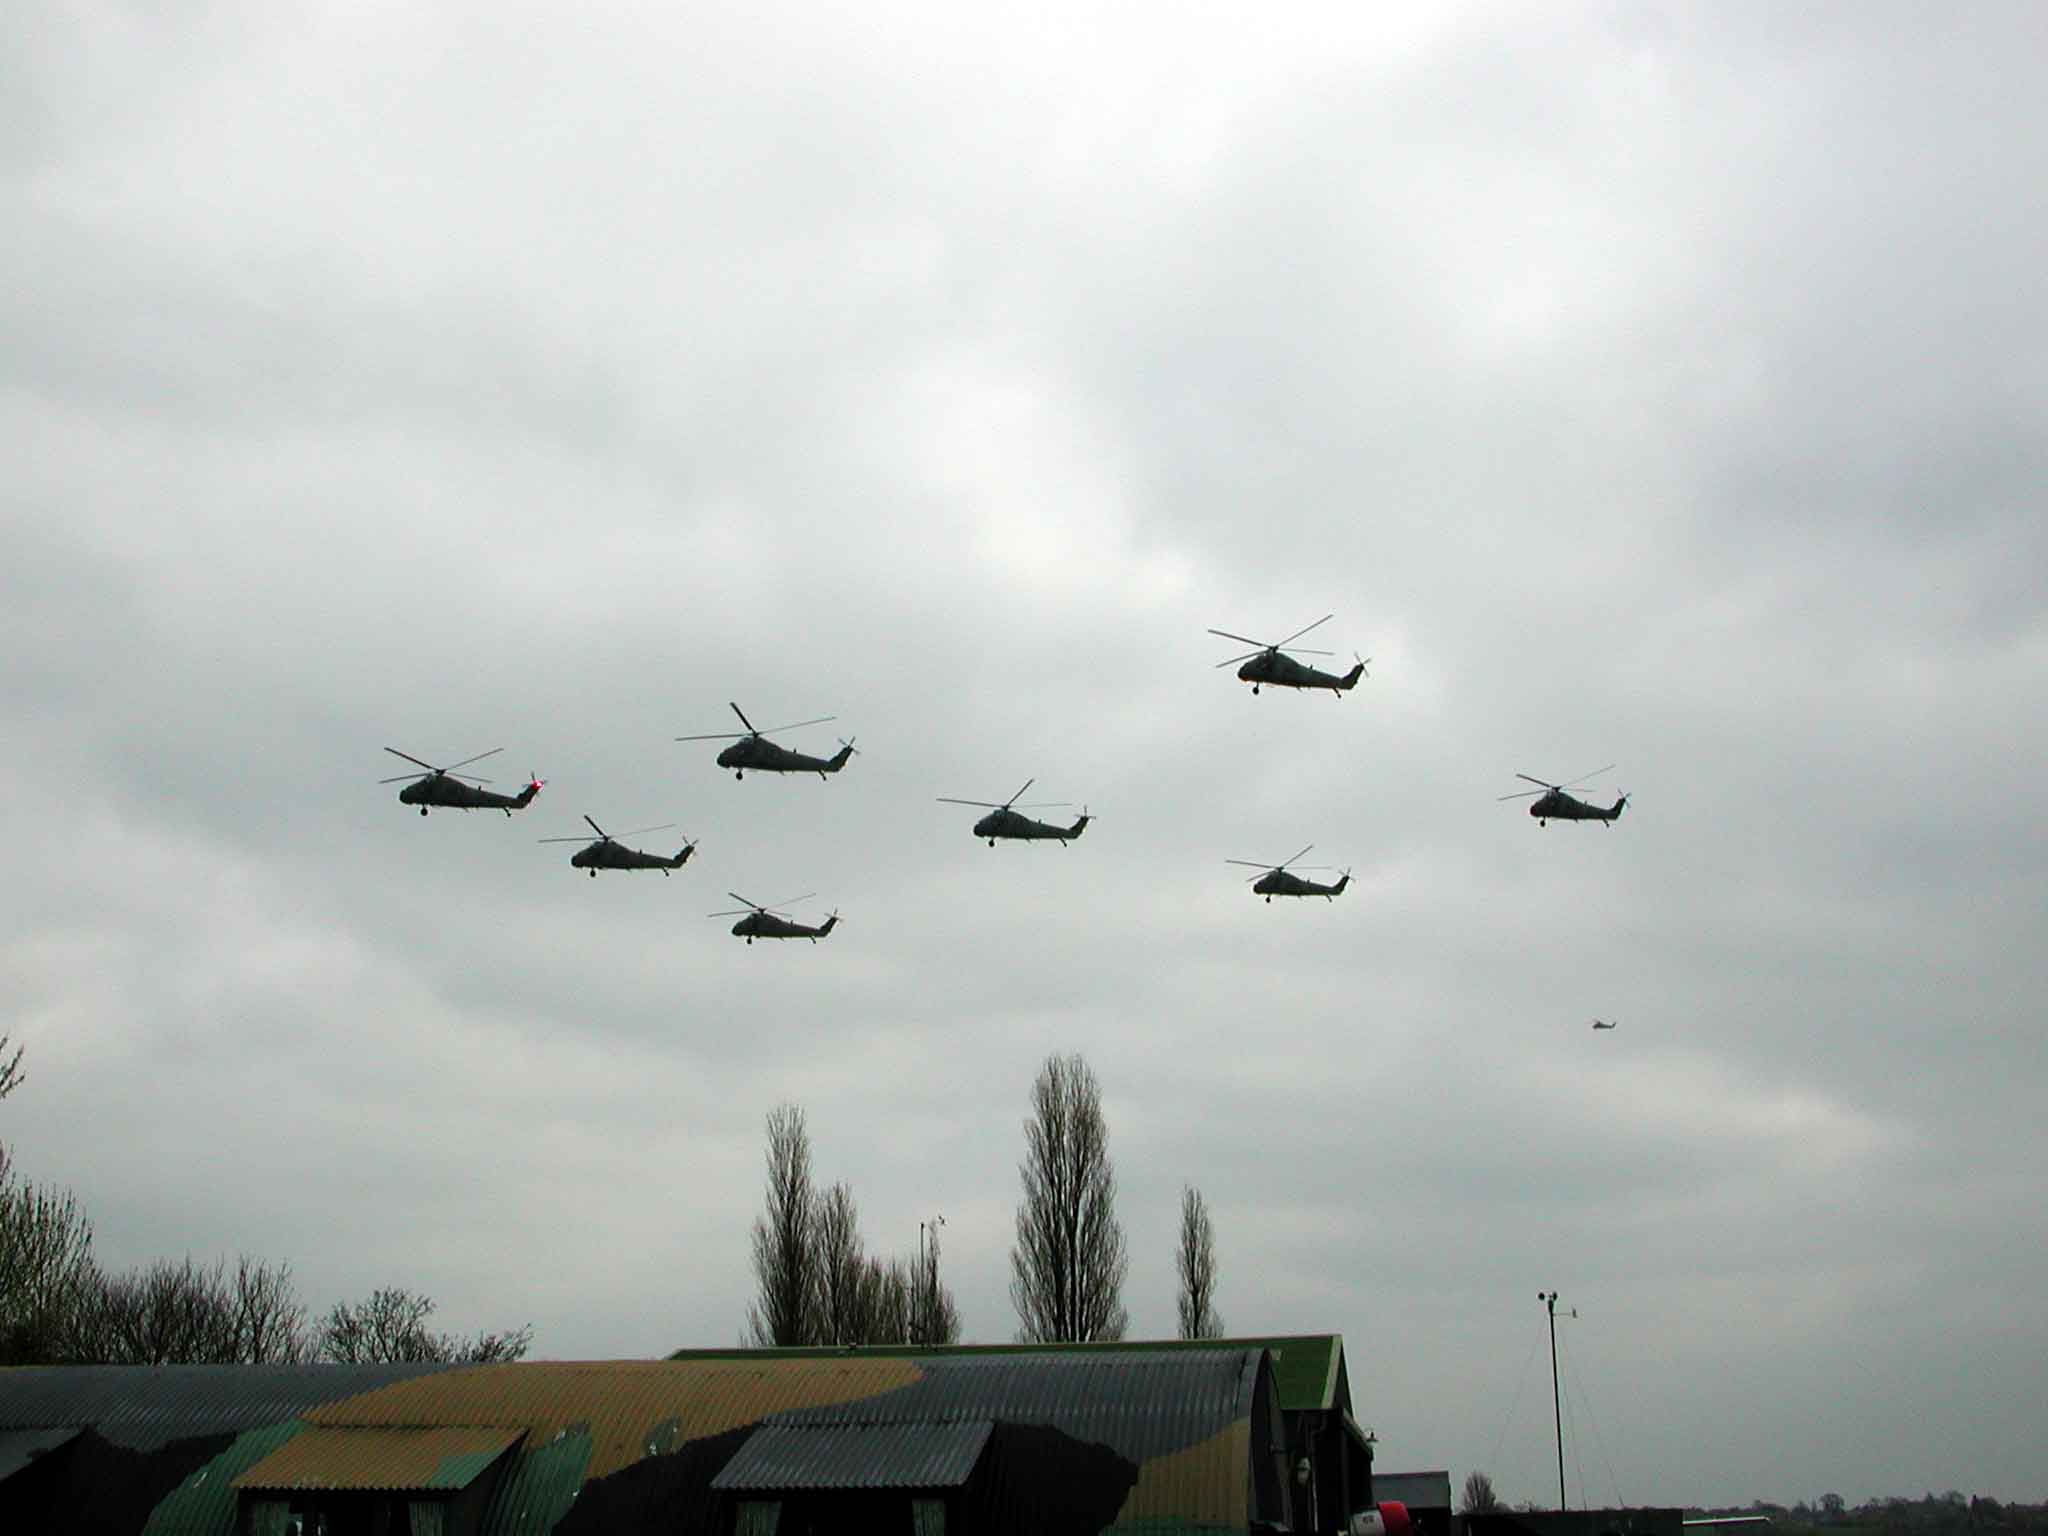 72 Squadron over North Weald airfield